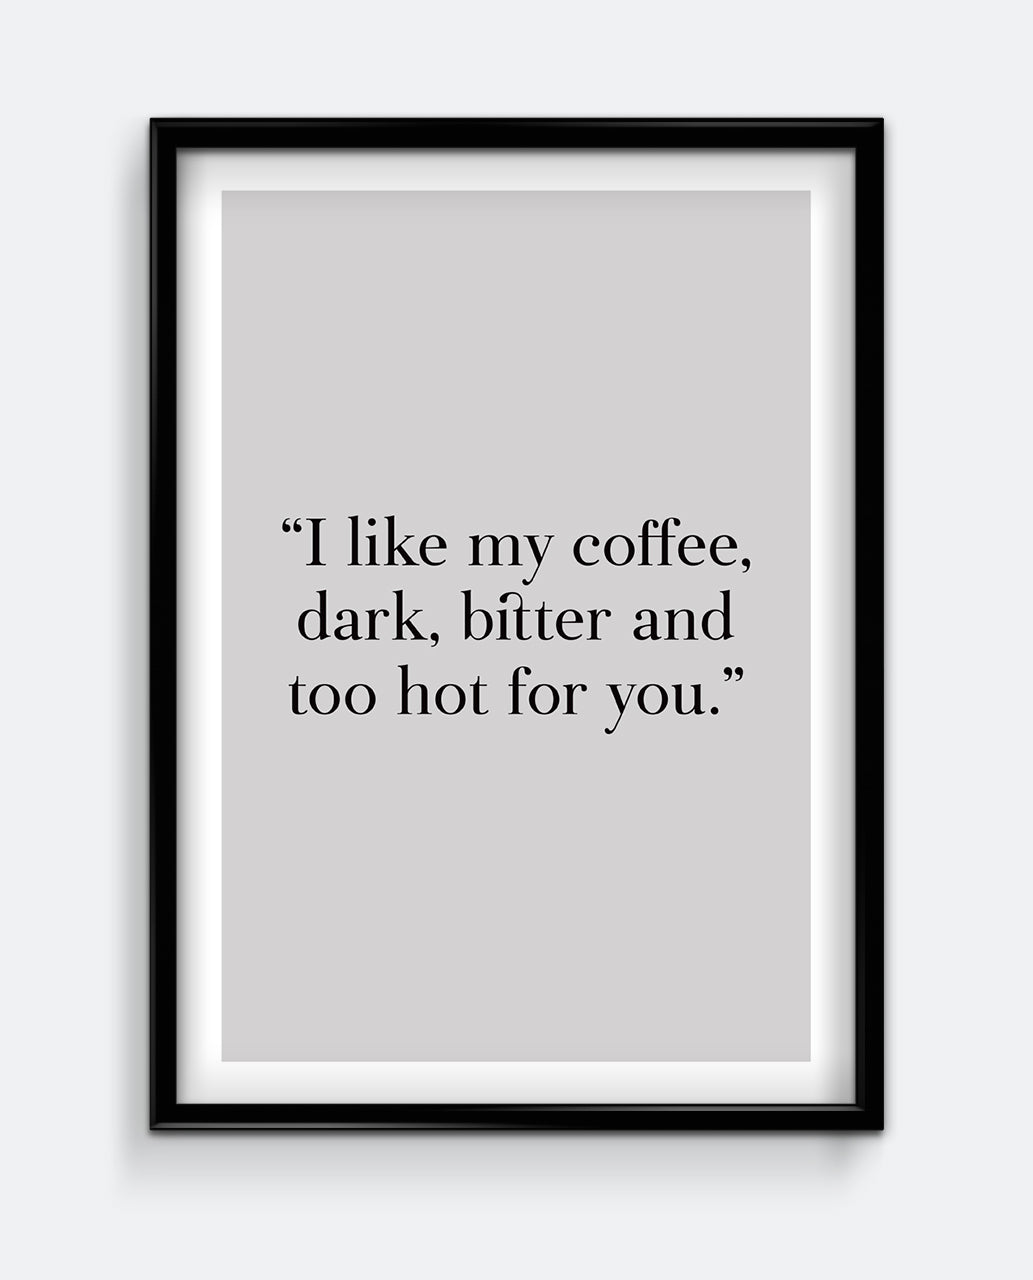 I like my coffee dark, bitter and too hot for you